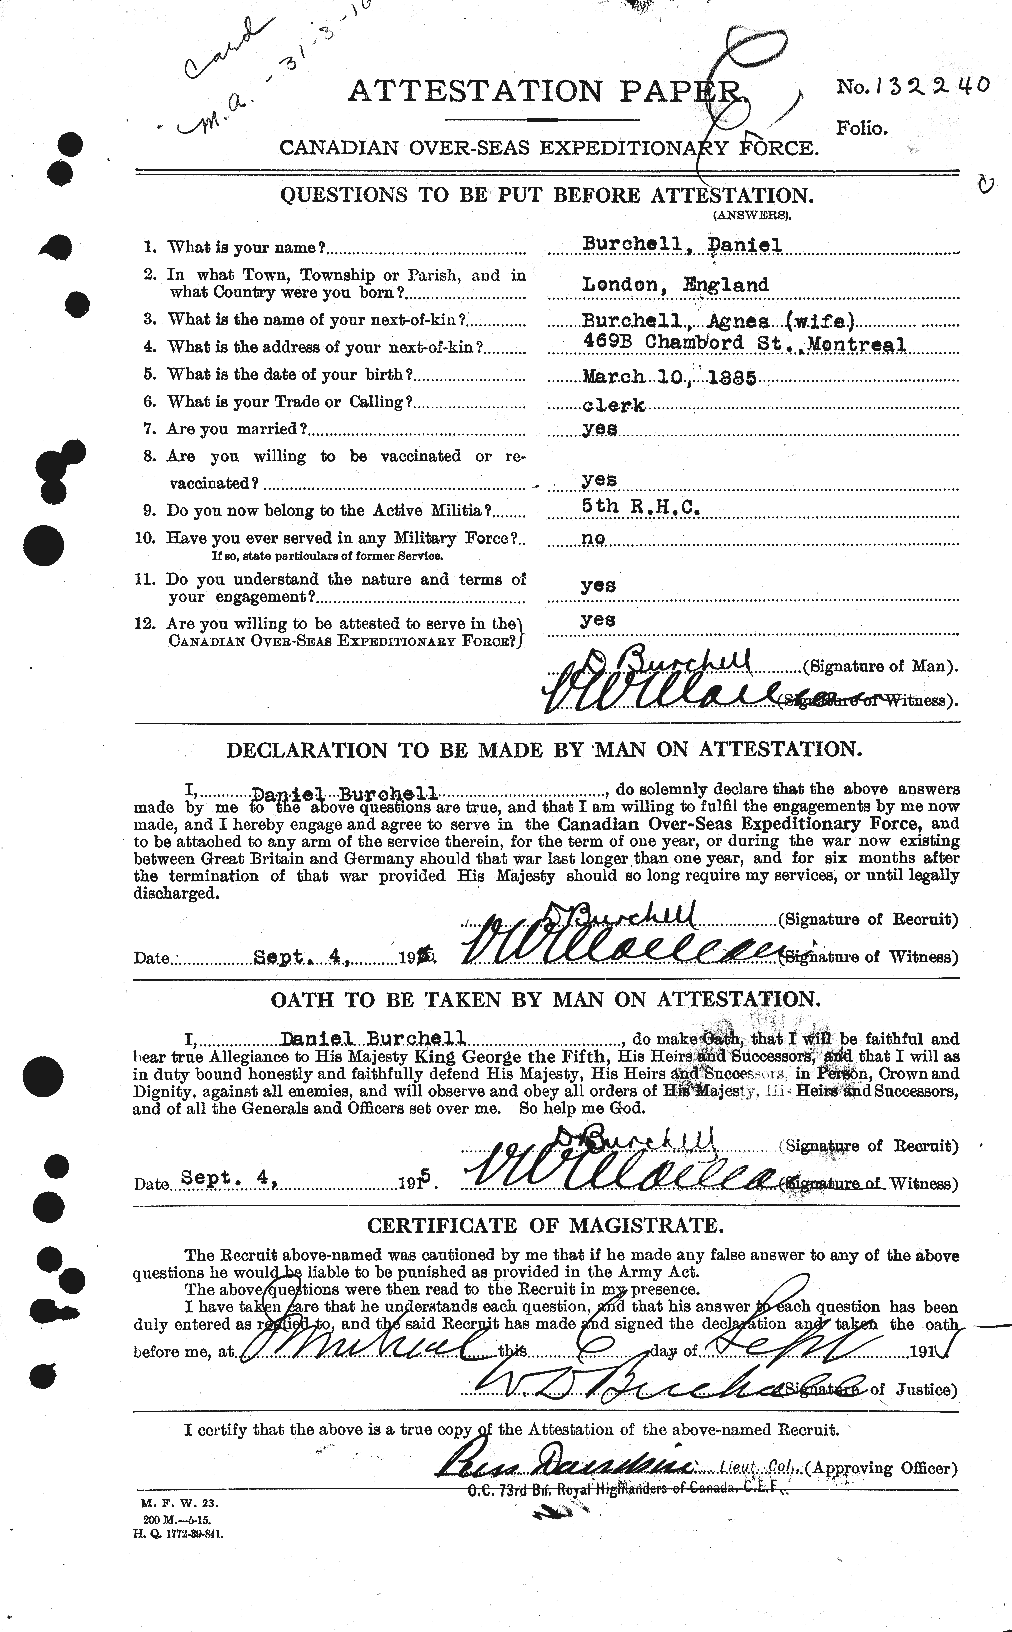 Personnel Records of the First World War - CEF 273142a